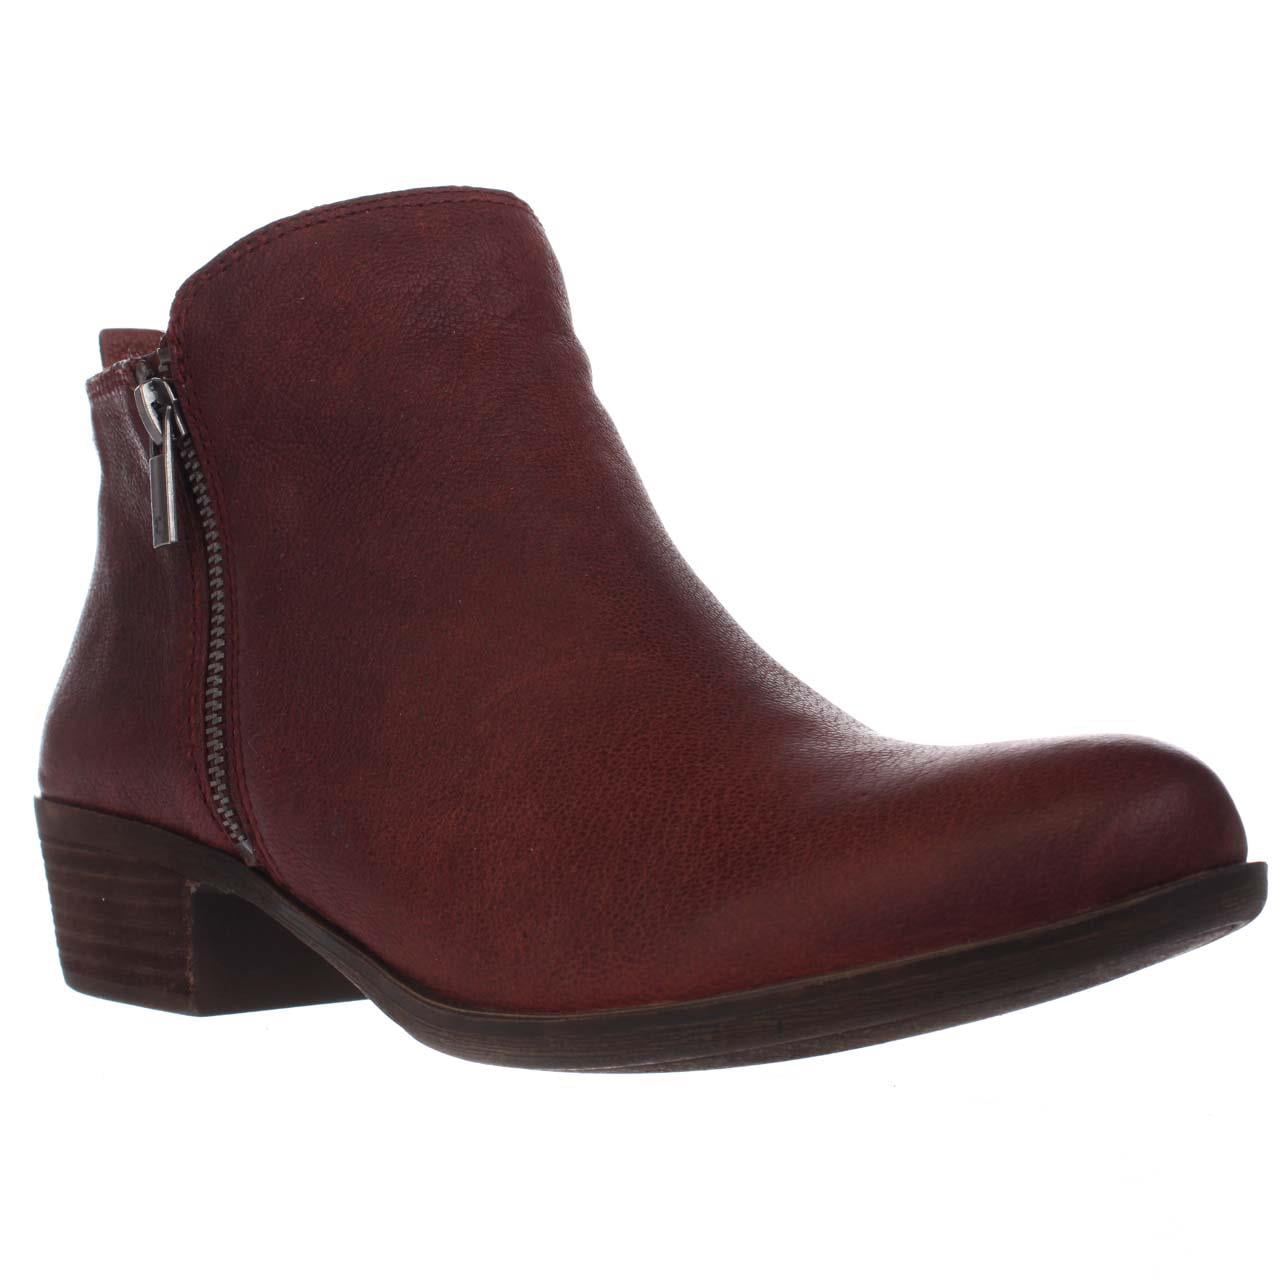 oxblood ankle boots womens